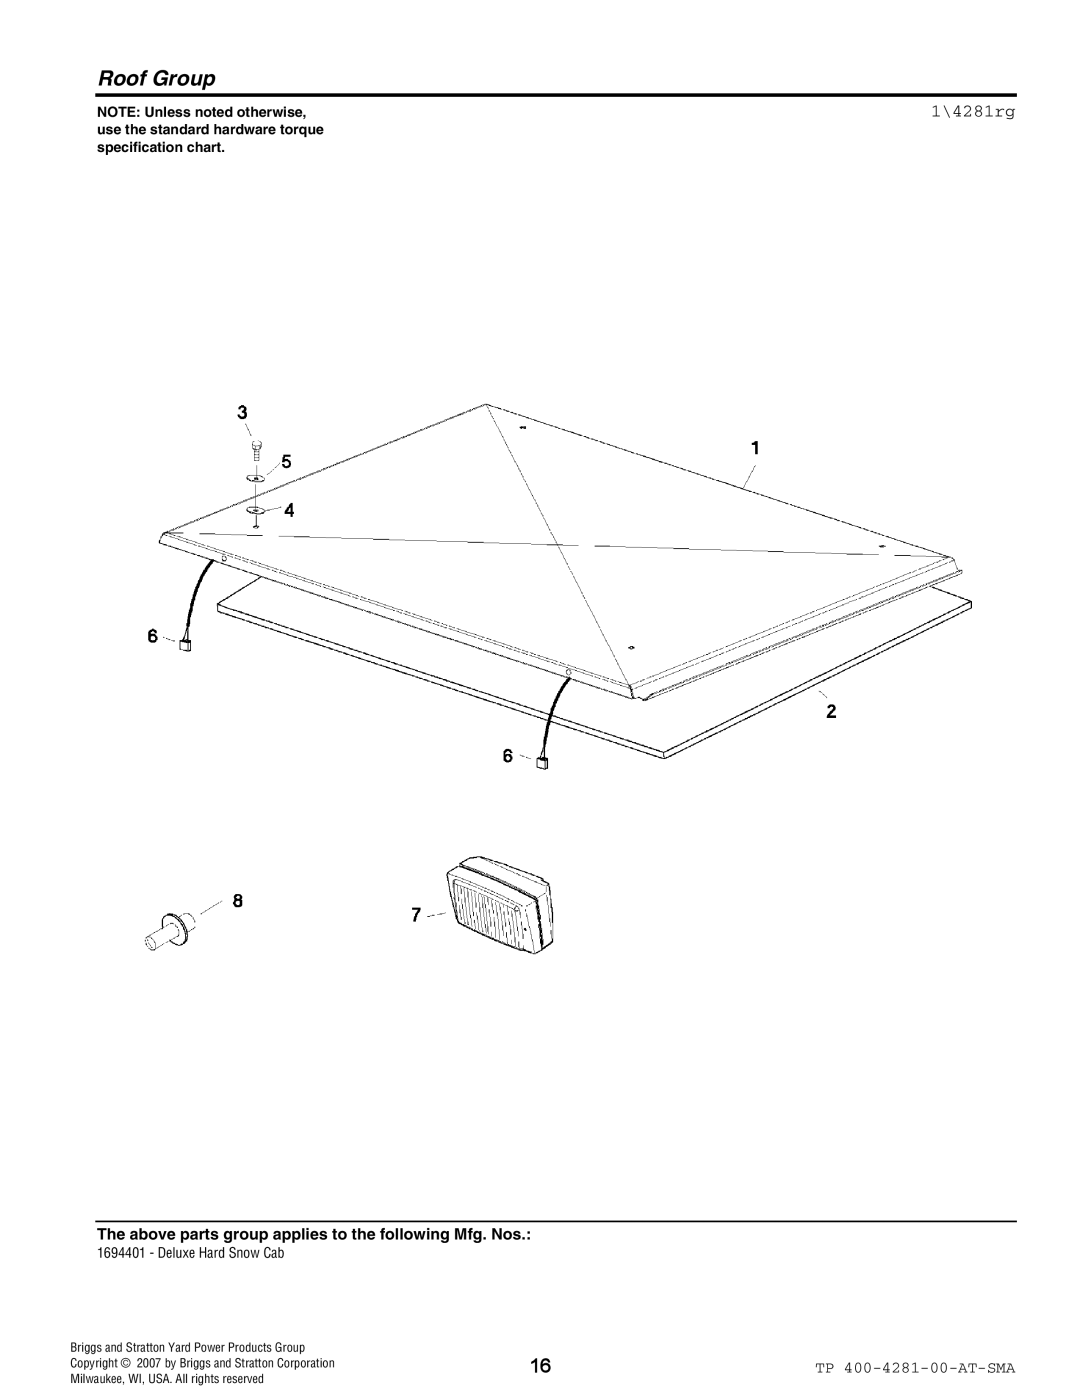 Snapper 1694401 manual Roof Group, 1\4281rg, NOTE Unless noted otherwise, Briggs and Stratton Yard Power Products Group 